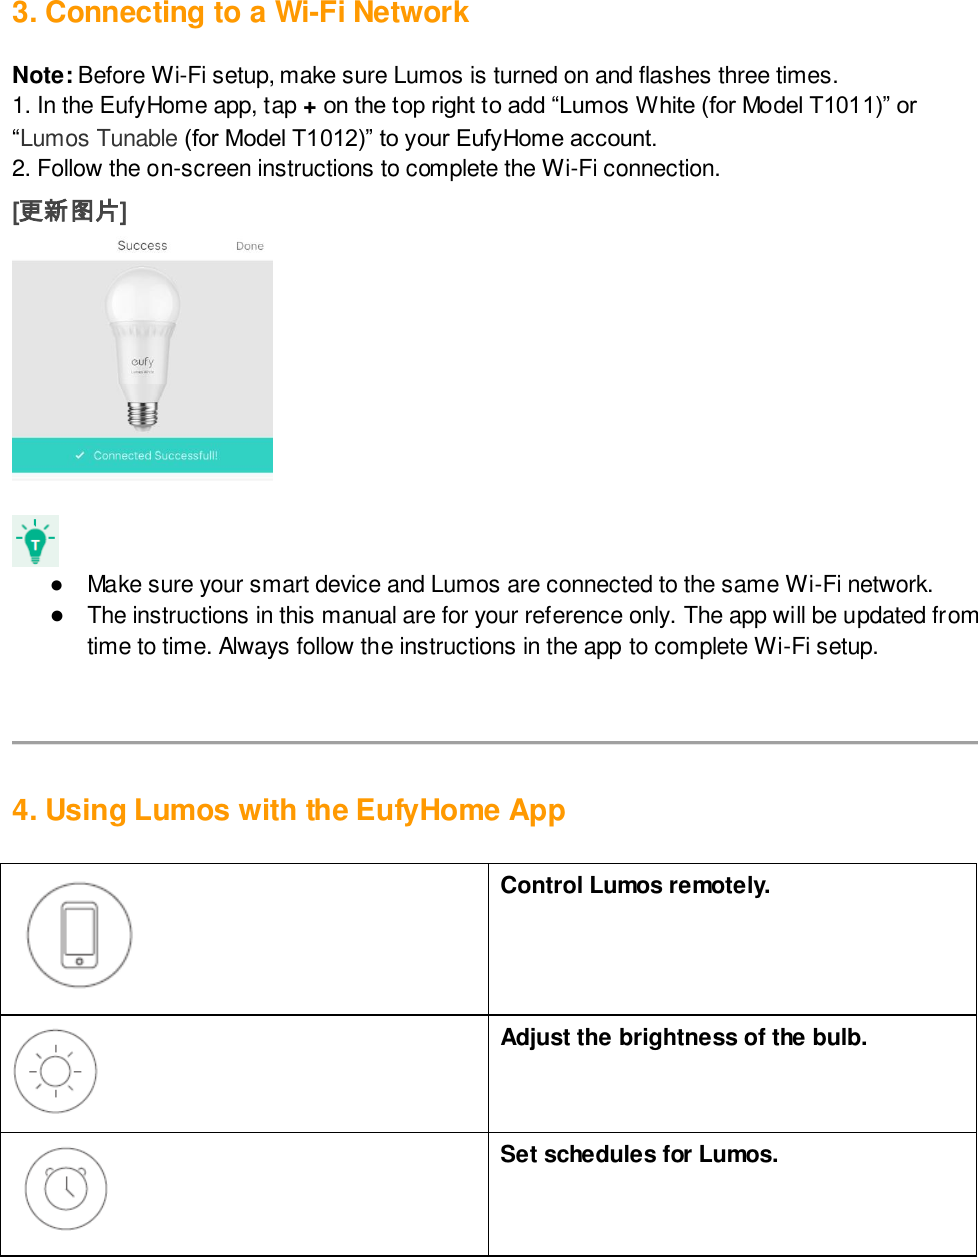 3. Connecting to a Wi-Fi Network  Note: Before Wi-Fi setup, make sure Lumos is turned on and flashes three times. 1. In the EufyHome app, tap + on the top right to add “Lumos White (for Model T1011)” or “Lumos Tunable (for Model T1012)” to your EufyHome account.  2. Follow the on-screen instructions to complete the Wi-Fi connection.  [更新图片]    ●  Make sure your smart device and Lumos are connected to the same Wi-Fi network.  ● The instructions in this manual are for your reference only. The app will be updated from time to time. Always follow the instructions in the app to complete Wi-Fi setup.      4. Using Lumos with the EufyHome App    Control Lumos remotely.   Adjust the brightness of the bulb.  Set schedules for Lumos.  